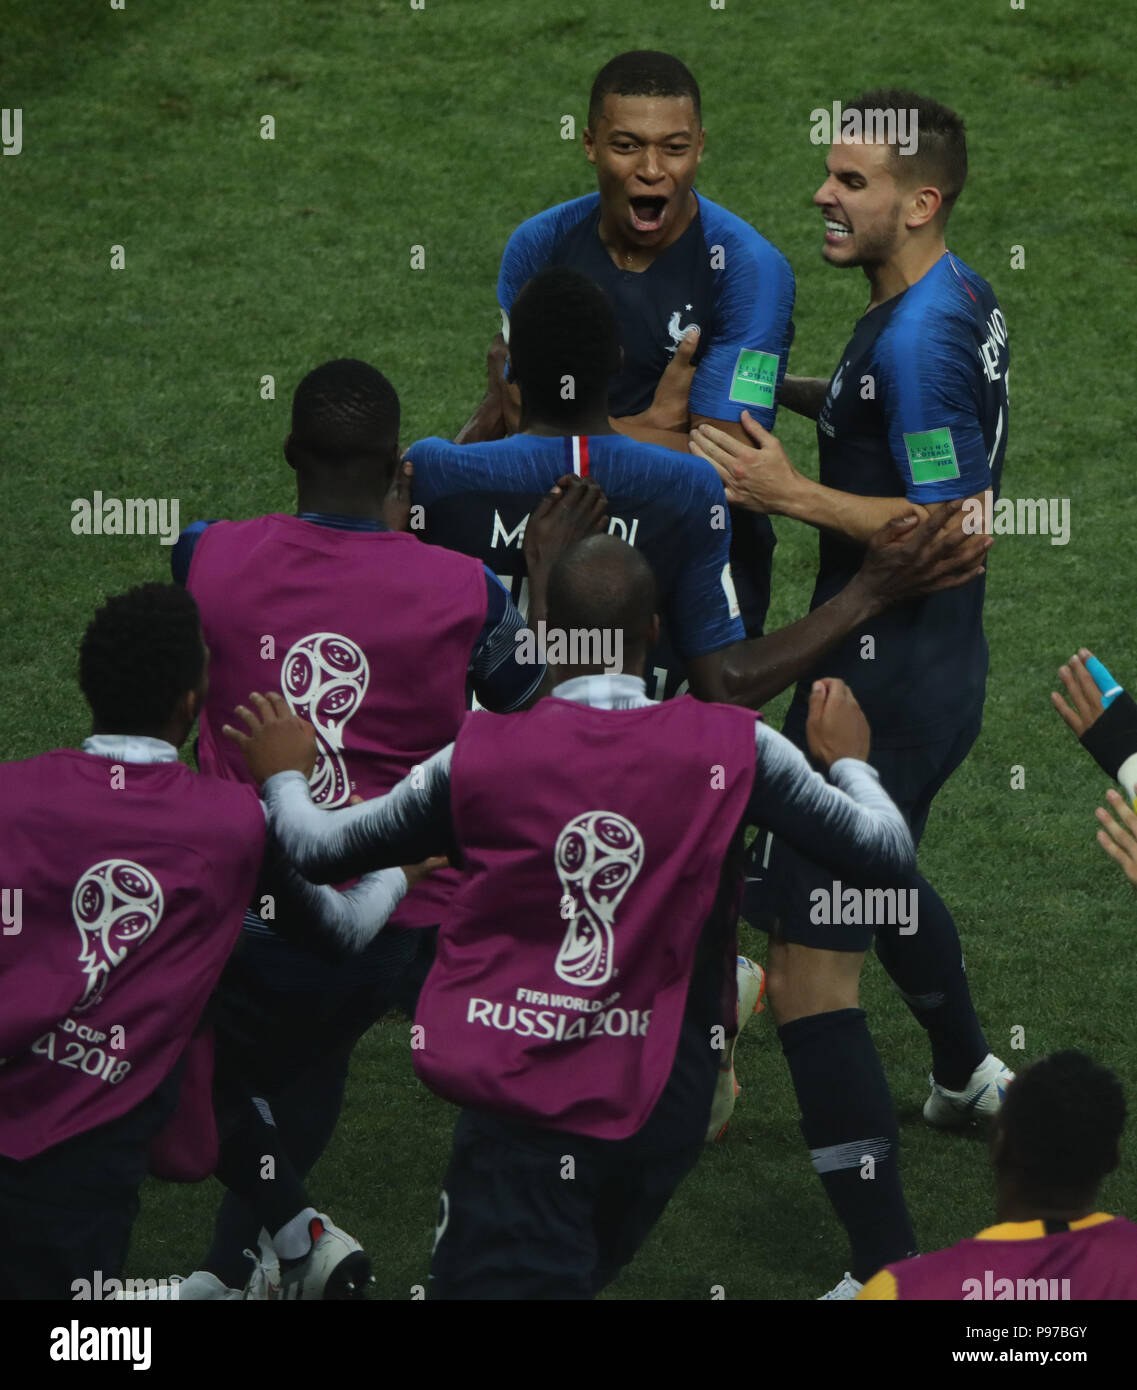 (180715) -- MOSCOW, July 15, 2018 (Xinhua) -- Kylian Mbappe (L top) of France celebrates scoring during the 2018 FIFA World Cup final match between France and Croatia in Moscow, Russia, July 15, 2018. (Xinhua/Wu Zhuang) Stock Photo